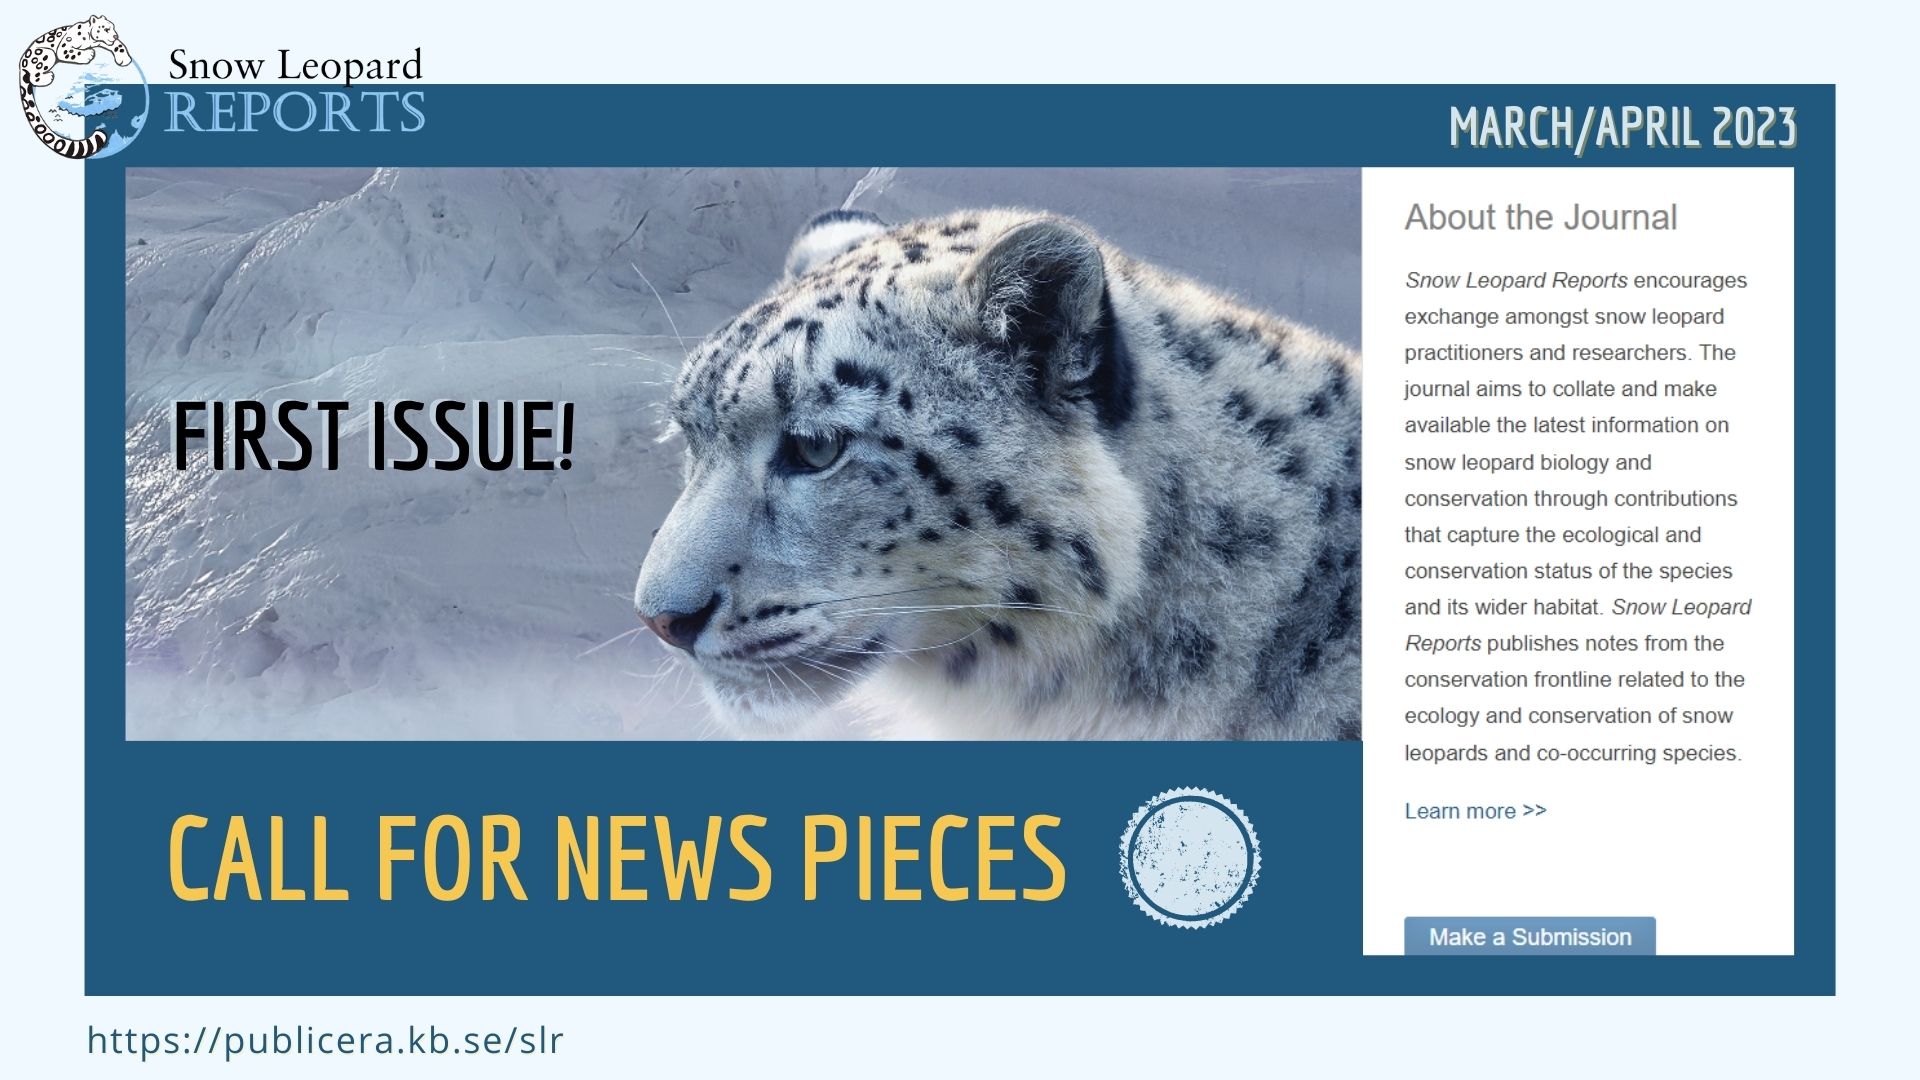 Snow Leopard Reports 1st Issue: Call for News